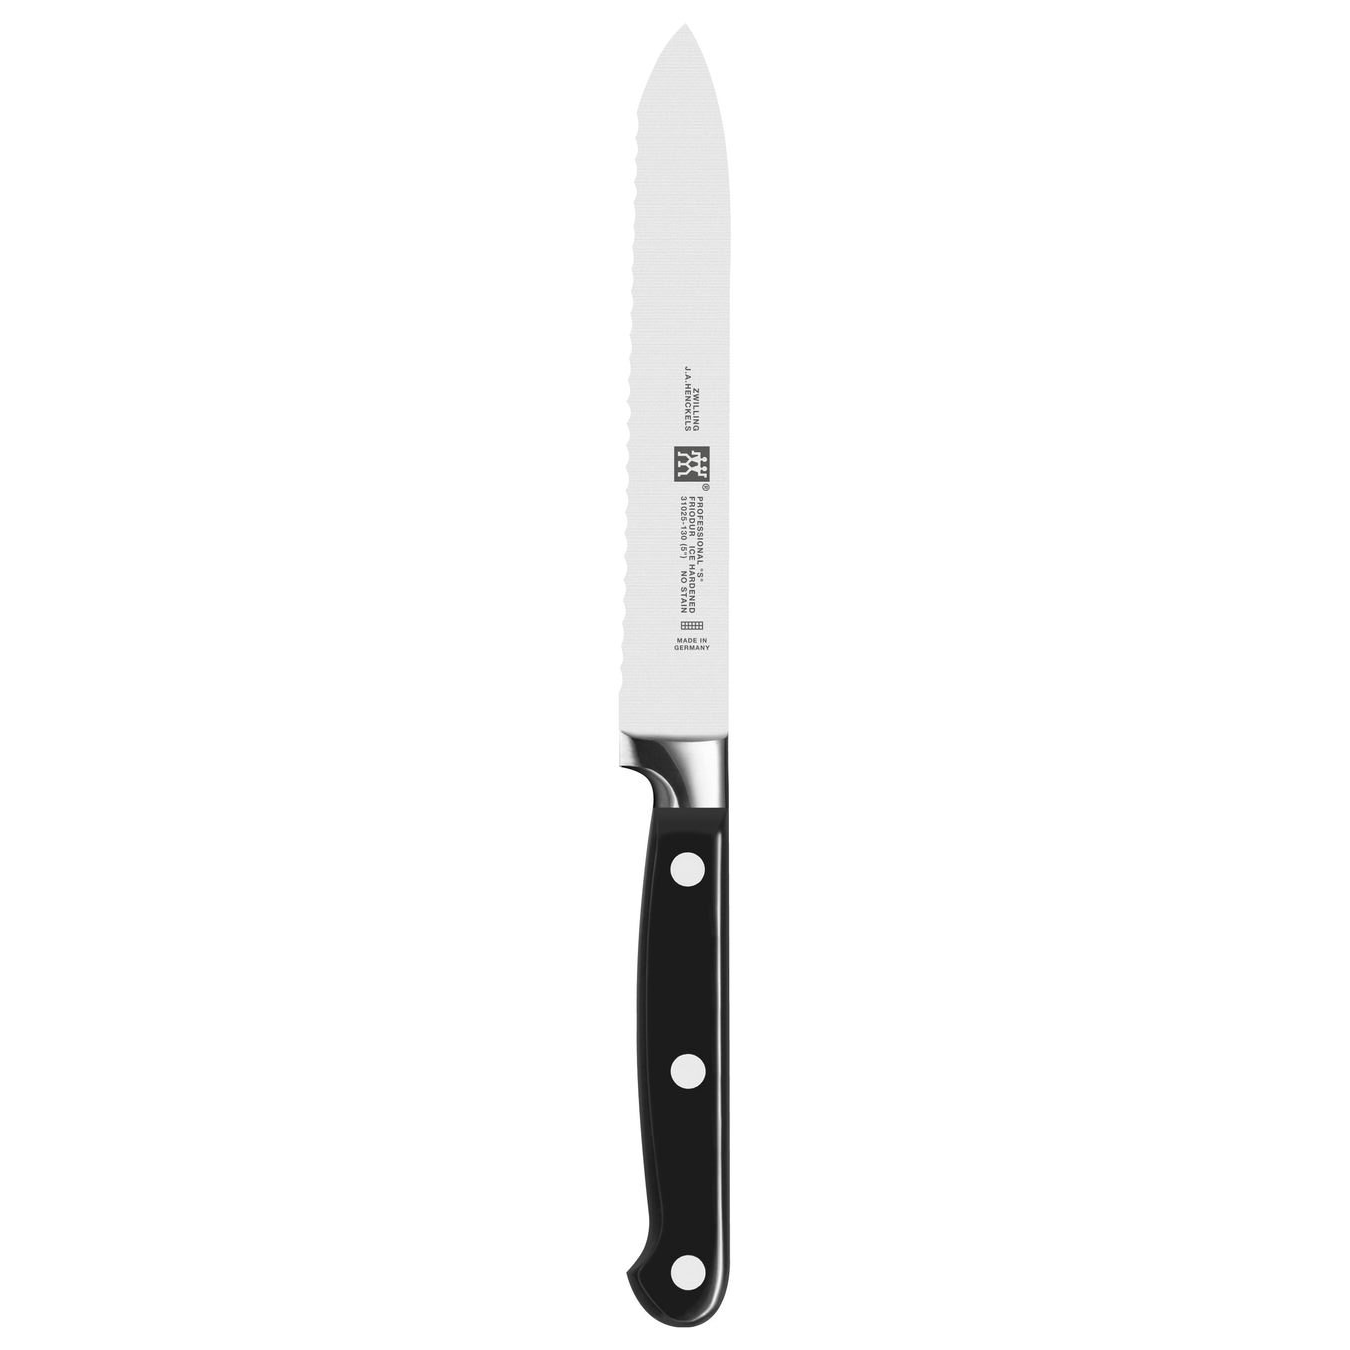 Zwilling Pro-S 5" Serrated Utility Knife